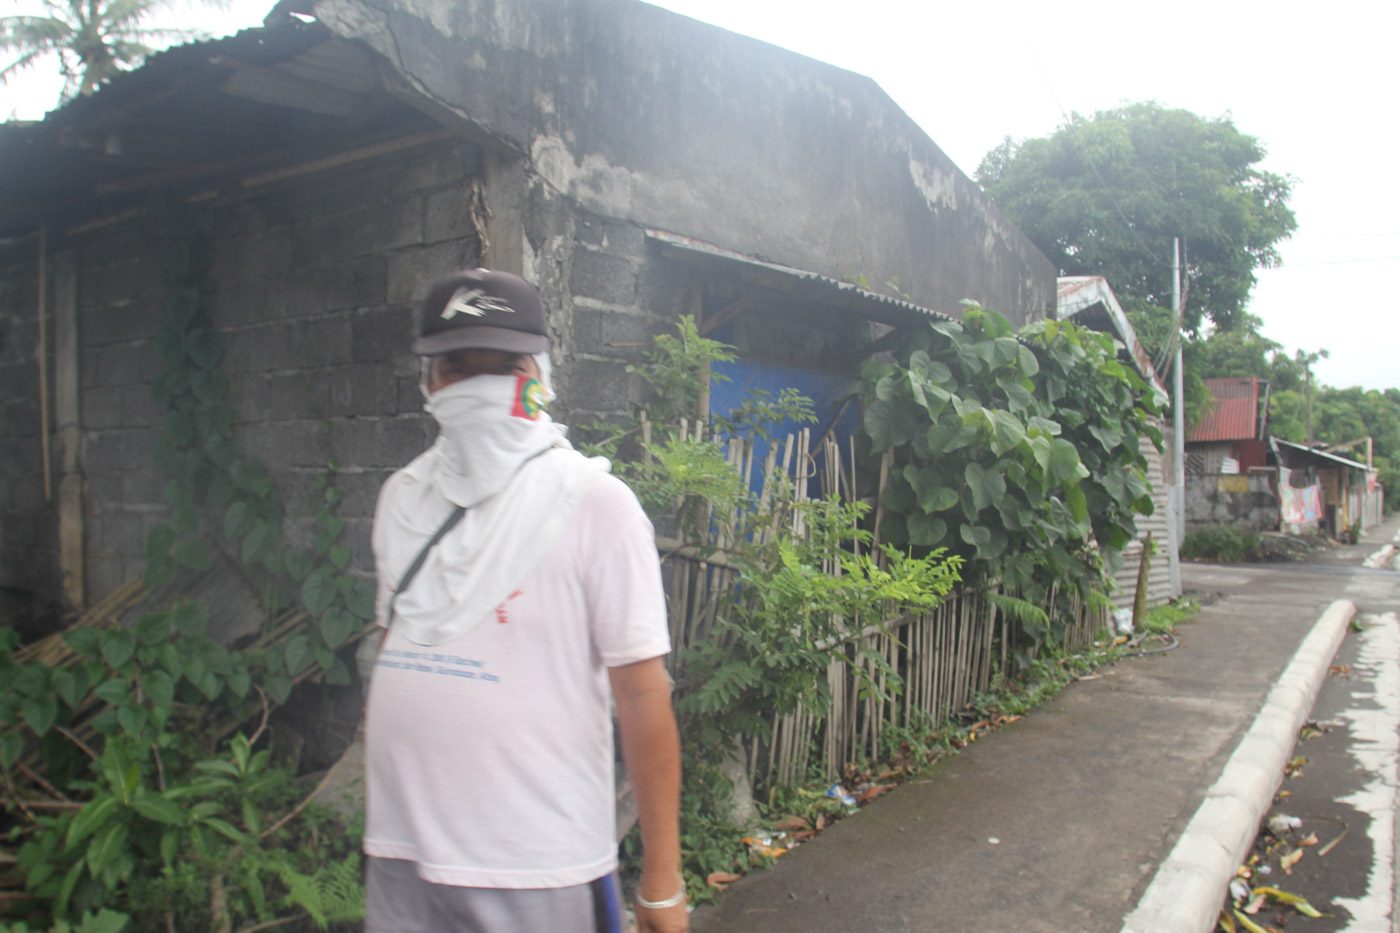 ASHFALL. A man uses a white cloth to cover his mouth and nose in Camalig, Albay amid ashfall from the Mayon Volcano. 